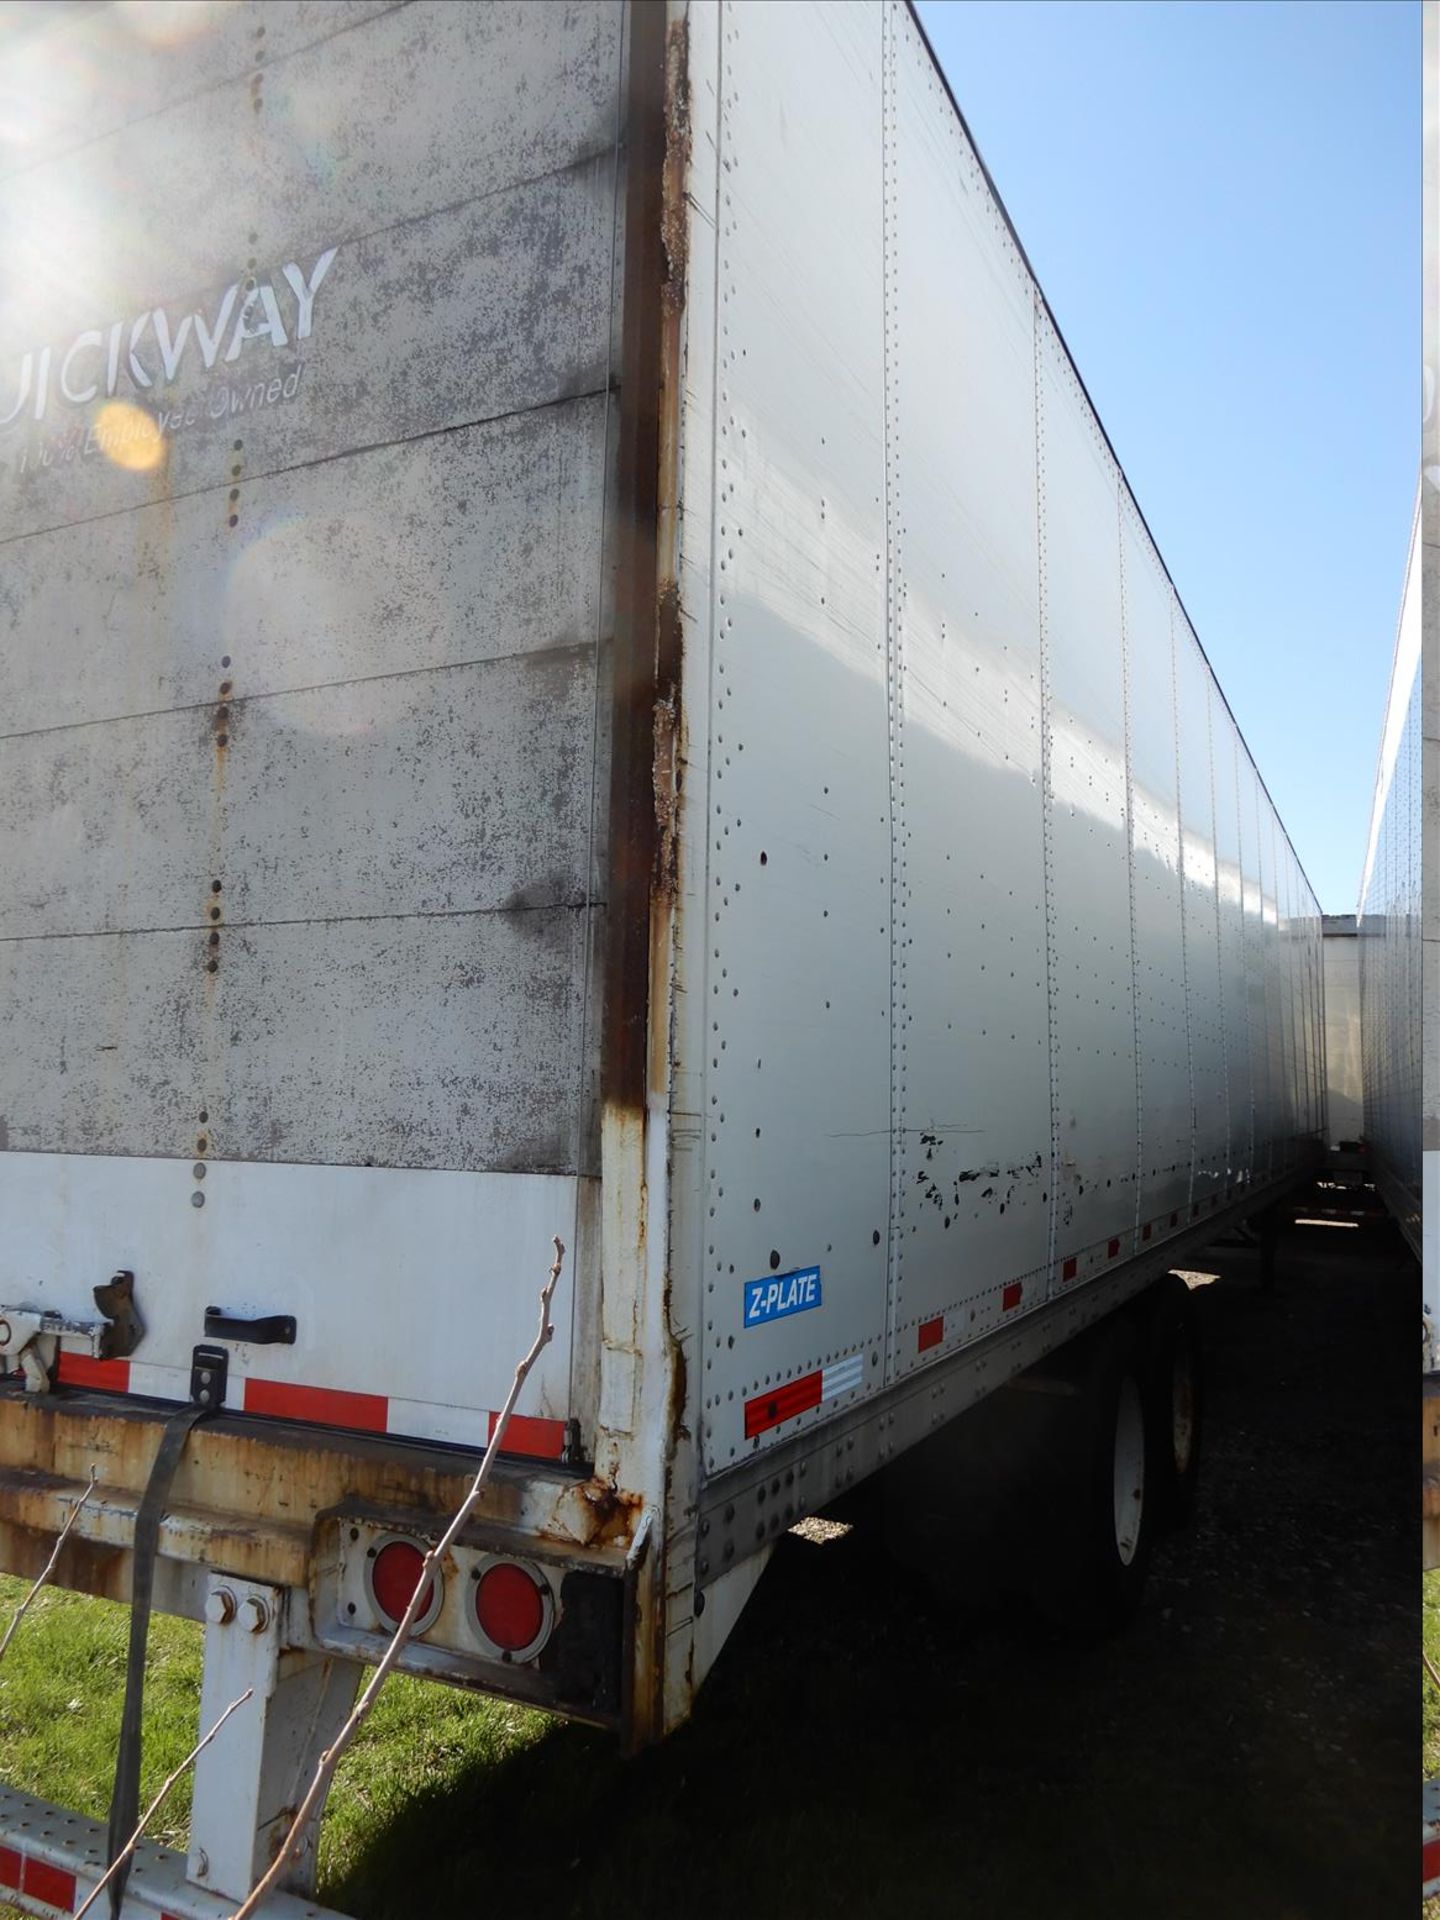 2012 Stoughton Trailer - Located in Indianapolis, IN - Image 11 of 20